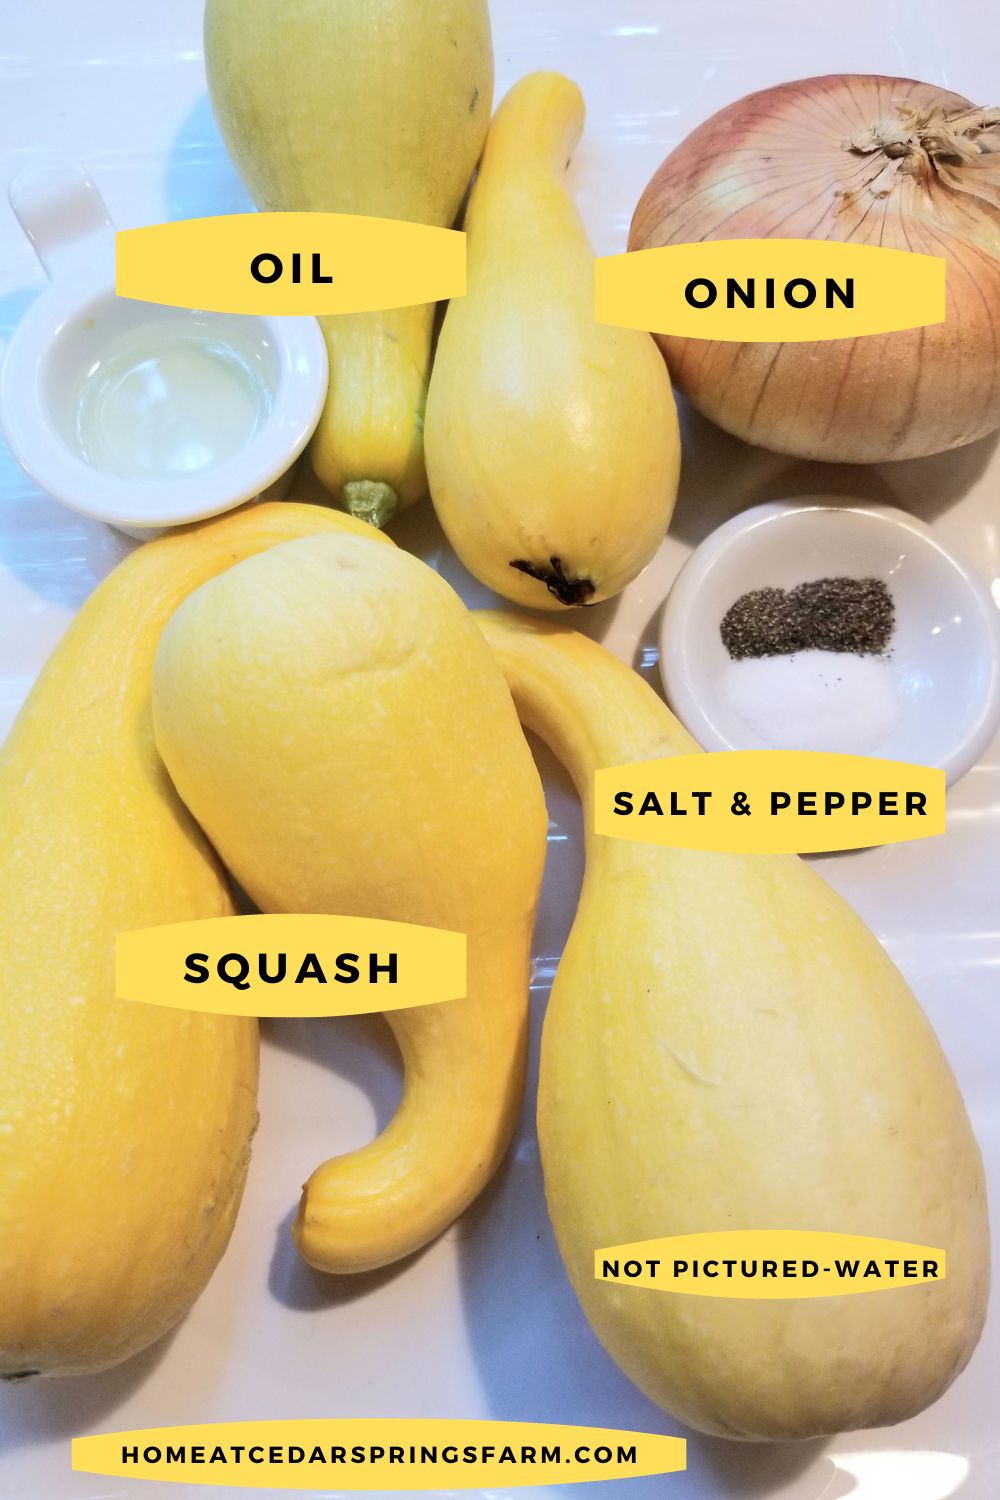 picture of squash and onion ingredients with text overlay